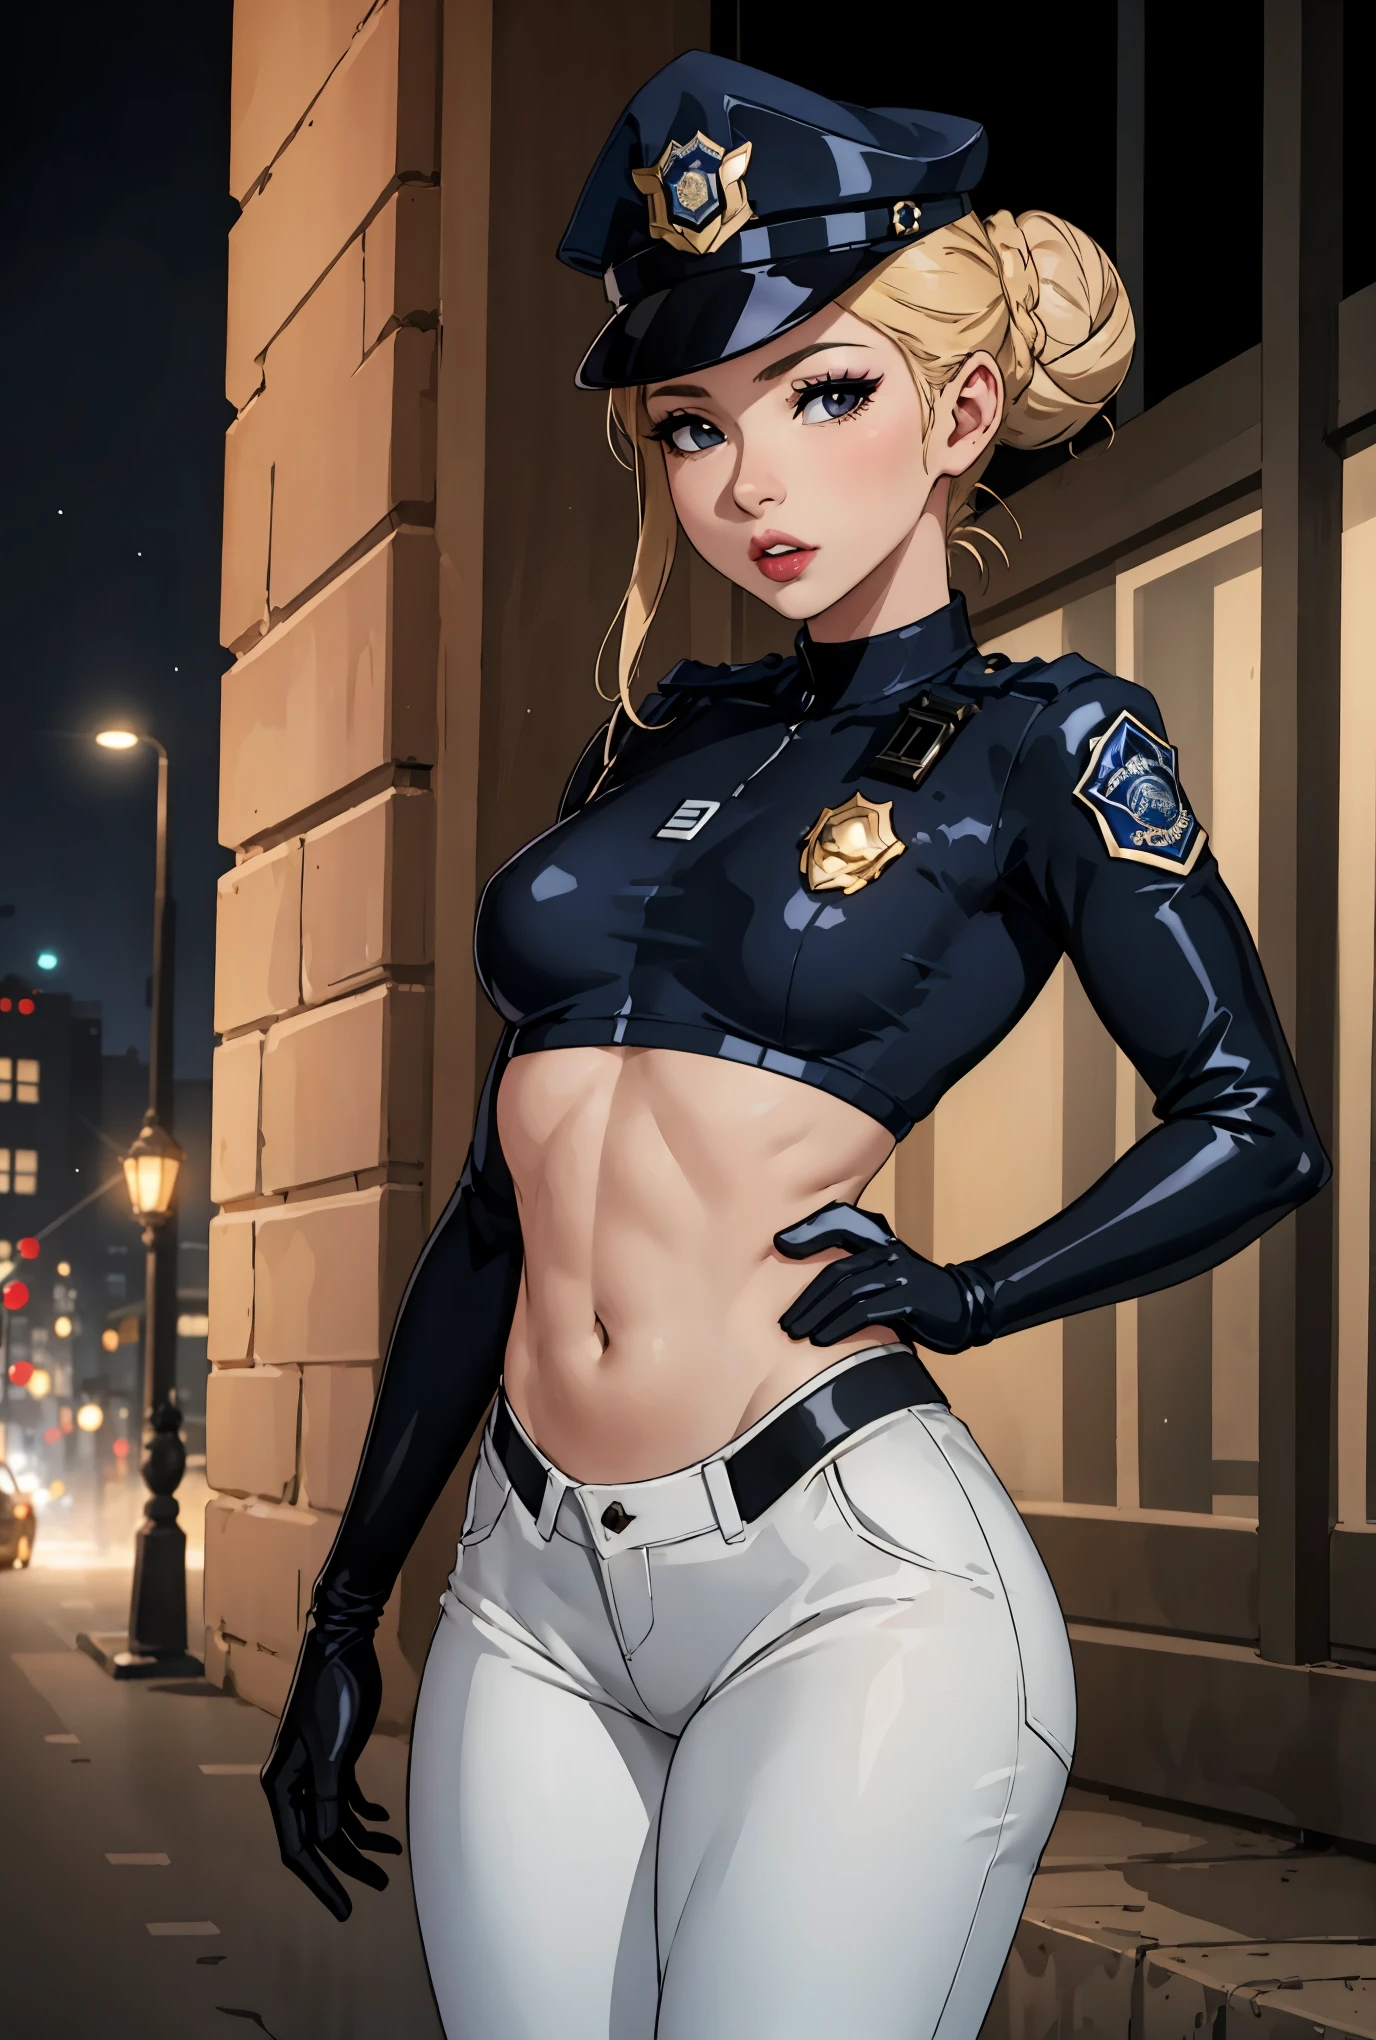 (Cowboy shot:1.5) 1 Same Girl , Perfect Beautiful , mature Face , ((korean woman)), Korean 18 Years Old , ((large hair bun:1.4)) , ((police officer outfit)), ((police cap:1.5)),Athletic Body , ((small breasts:1.5)) Extreme Detailed Portrait With Bokeh Effect , Realistic Lighting ,(latex pants)Night Street View , Dark Vibe , (petite body:1.7) streets , Gothic Makeup  , Posing Like a Model , Look at Viewer, ((puffy lips:1.3)), cool lighting, blue street lamp light((sunset ambiance light:0.8))